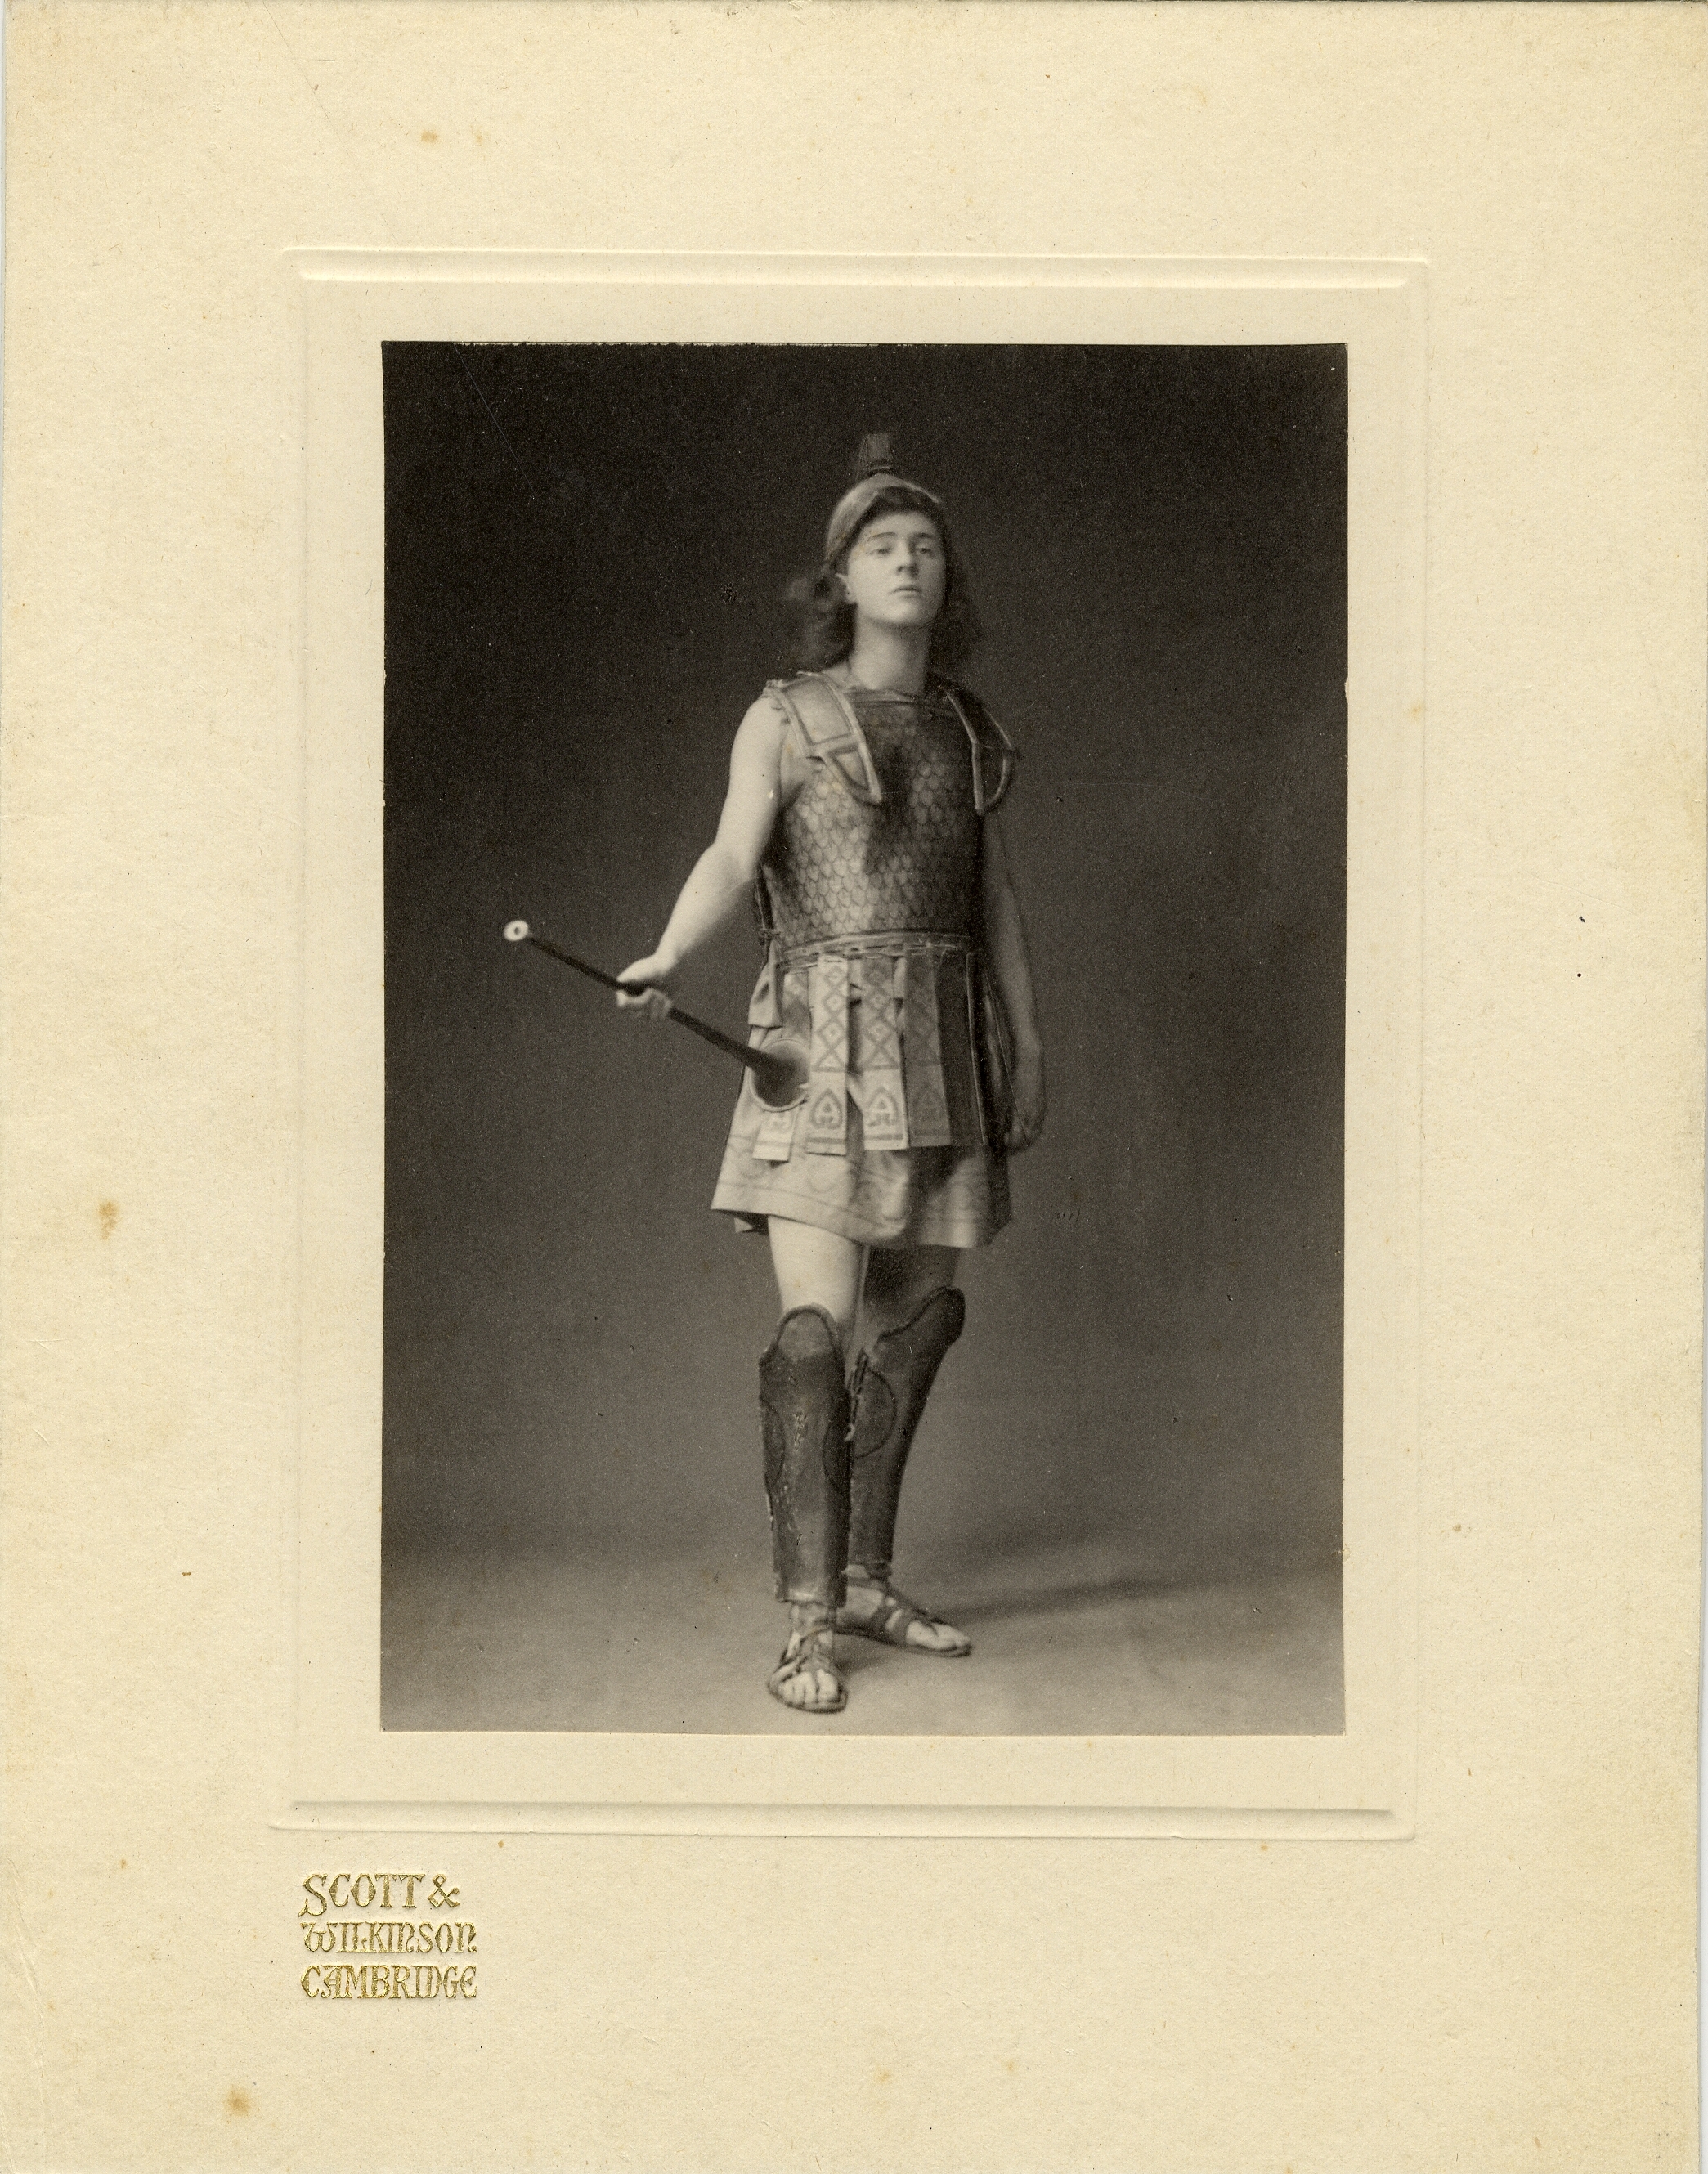 Cambridge had a ‘Greek Play’ tradition dating back to 1882, with performances being conducted entirely in Greek, which must have appealed to Rupert Brooke’s interests in both Classics and drama. He played the herald in Eumenides. [RCB/Ph/46]